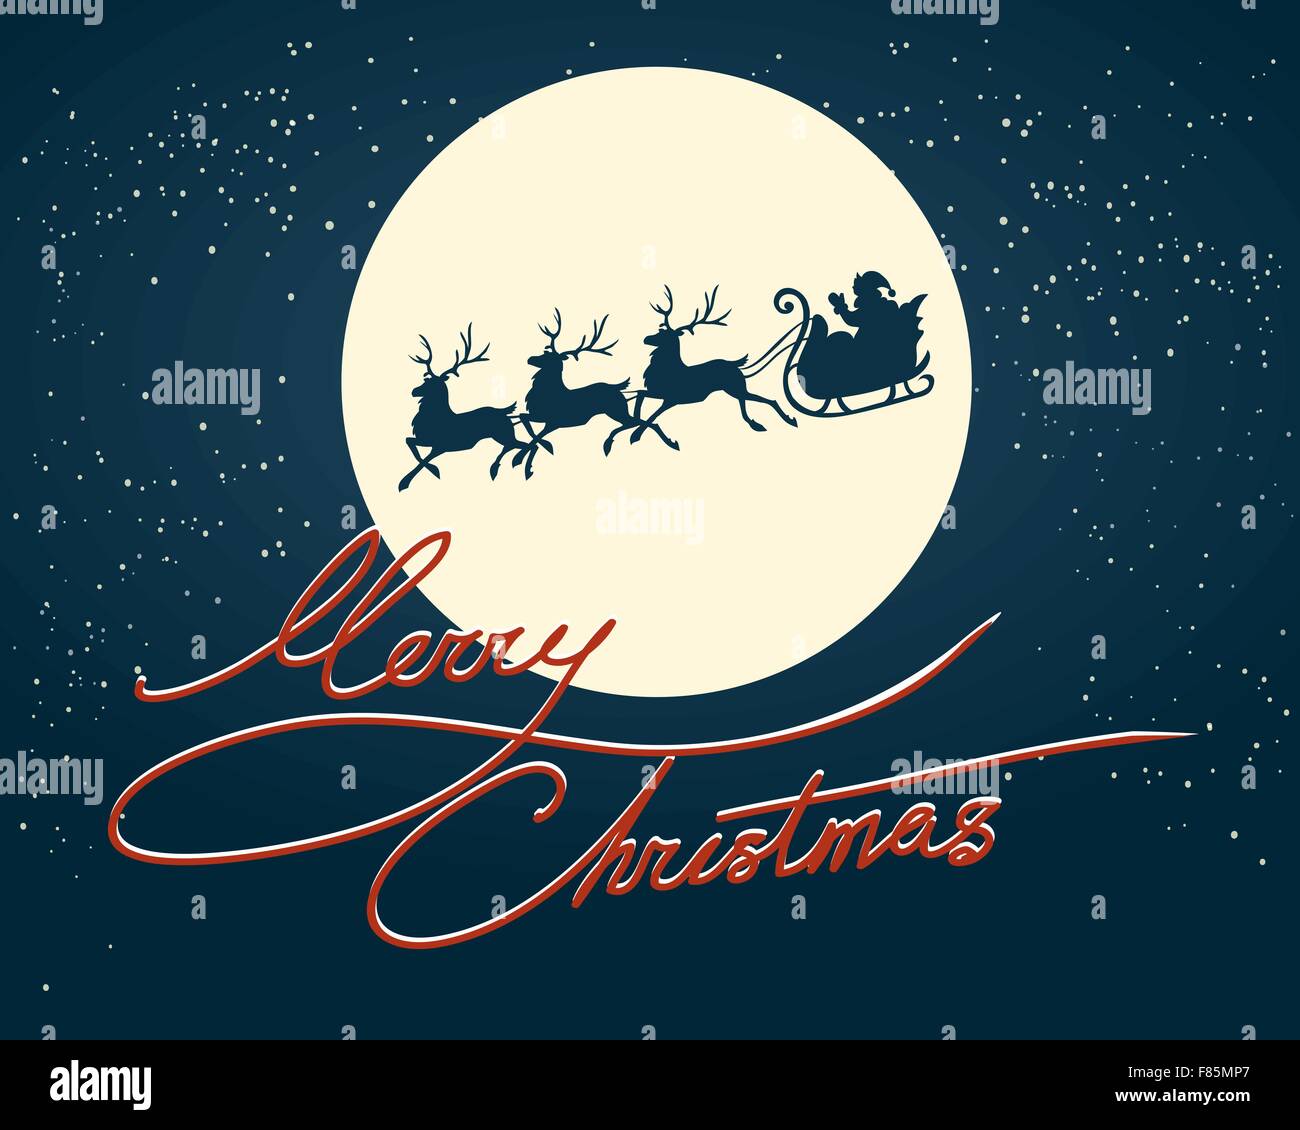 Santa Claus riding on sledges on a background of the full moon. Illustration in retro style Stock Vector